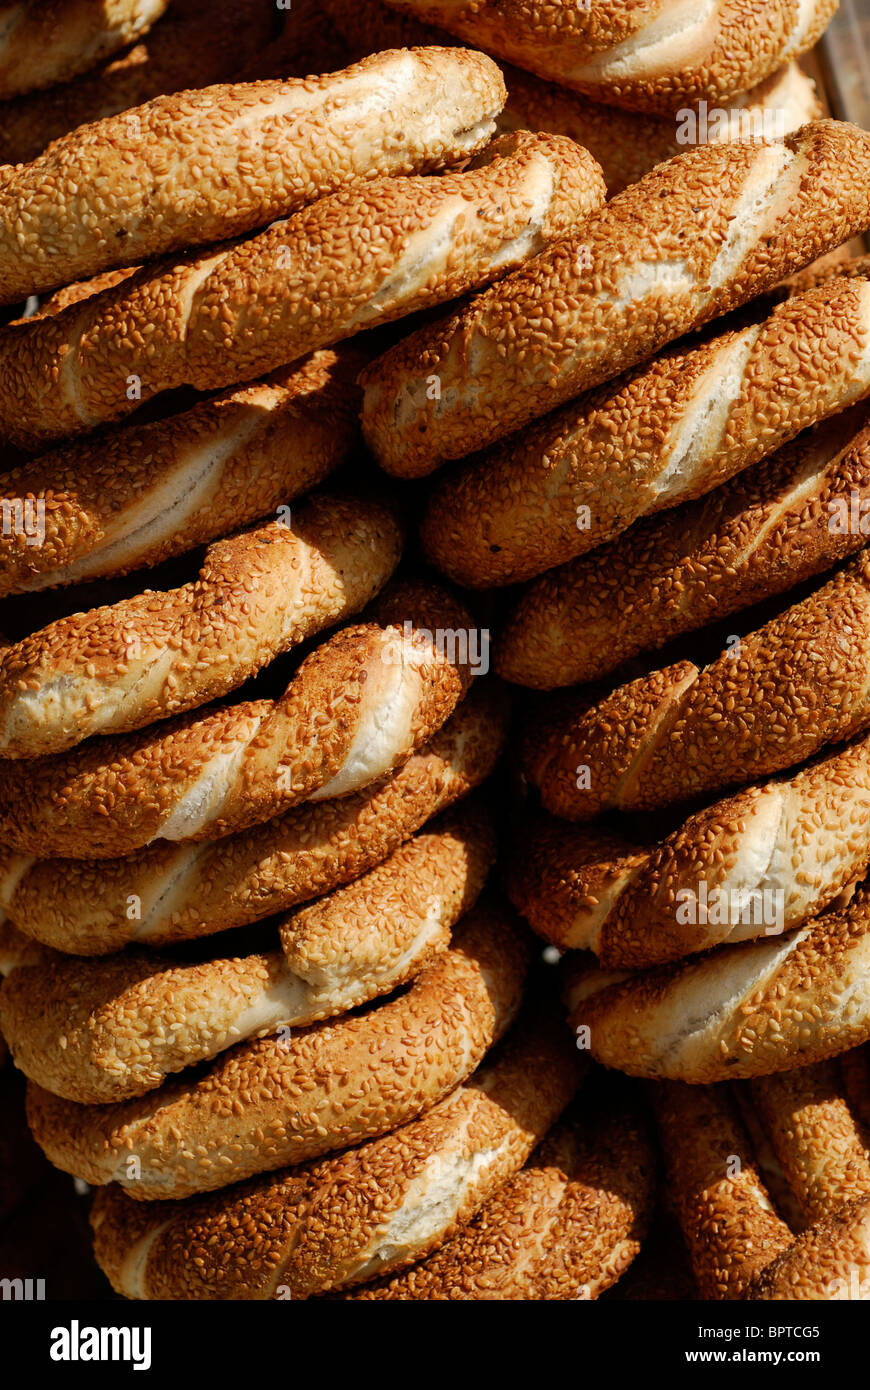 Istanbul. Turkey. Simit, traditional turkish bread or bagel covered in sesame seeds. Stock Photo